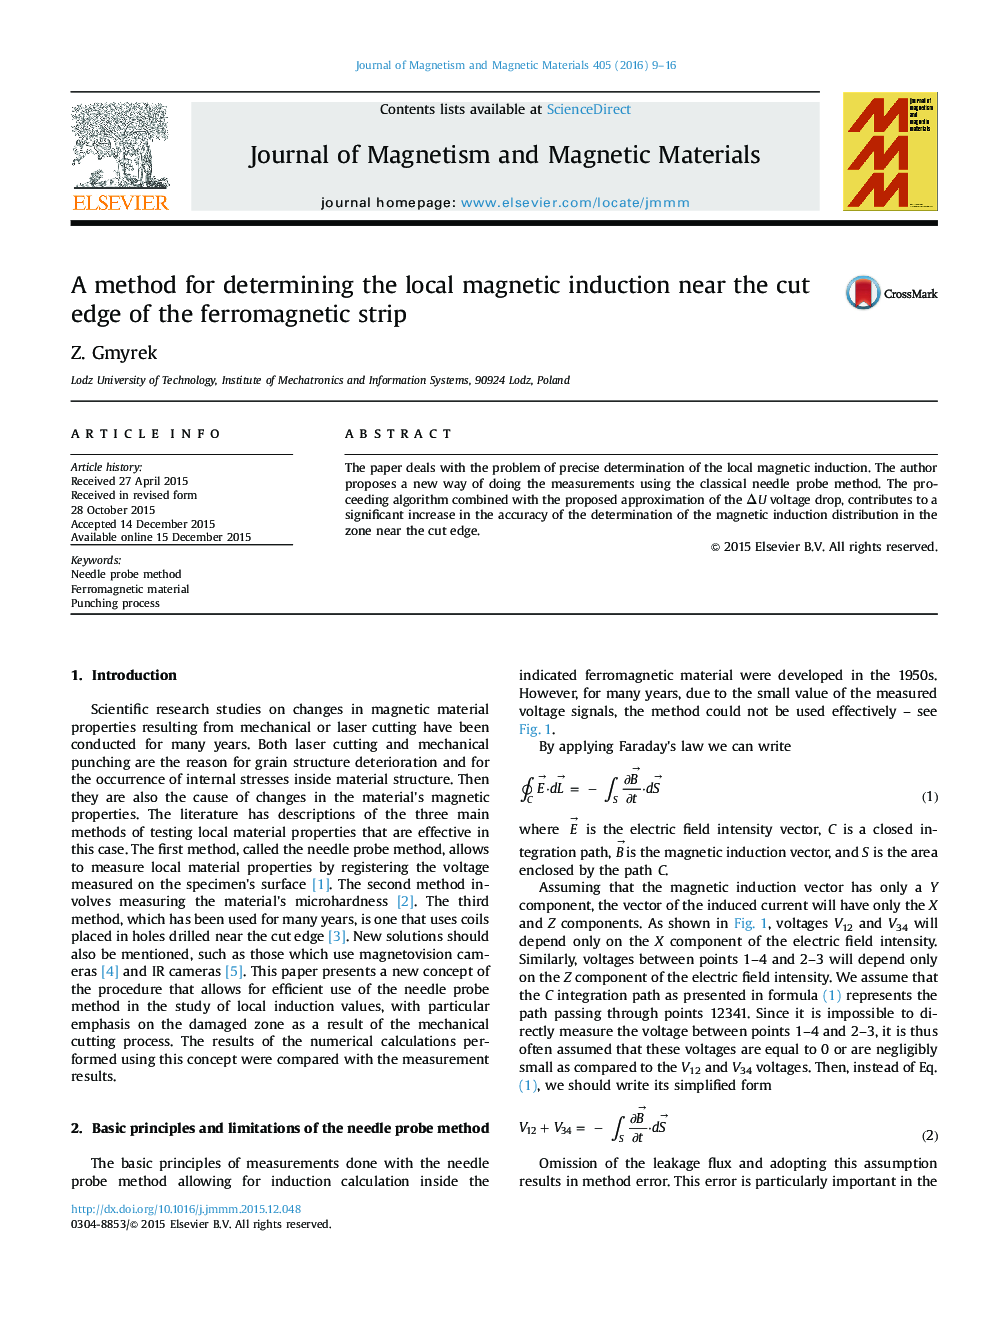 A method for determining the local magnetic induction near the cut edge of the ferromagnetic strip